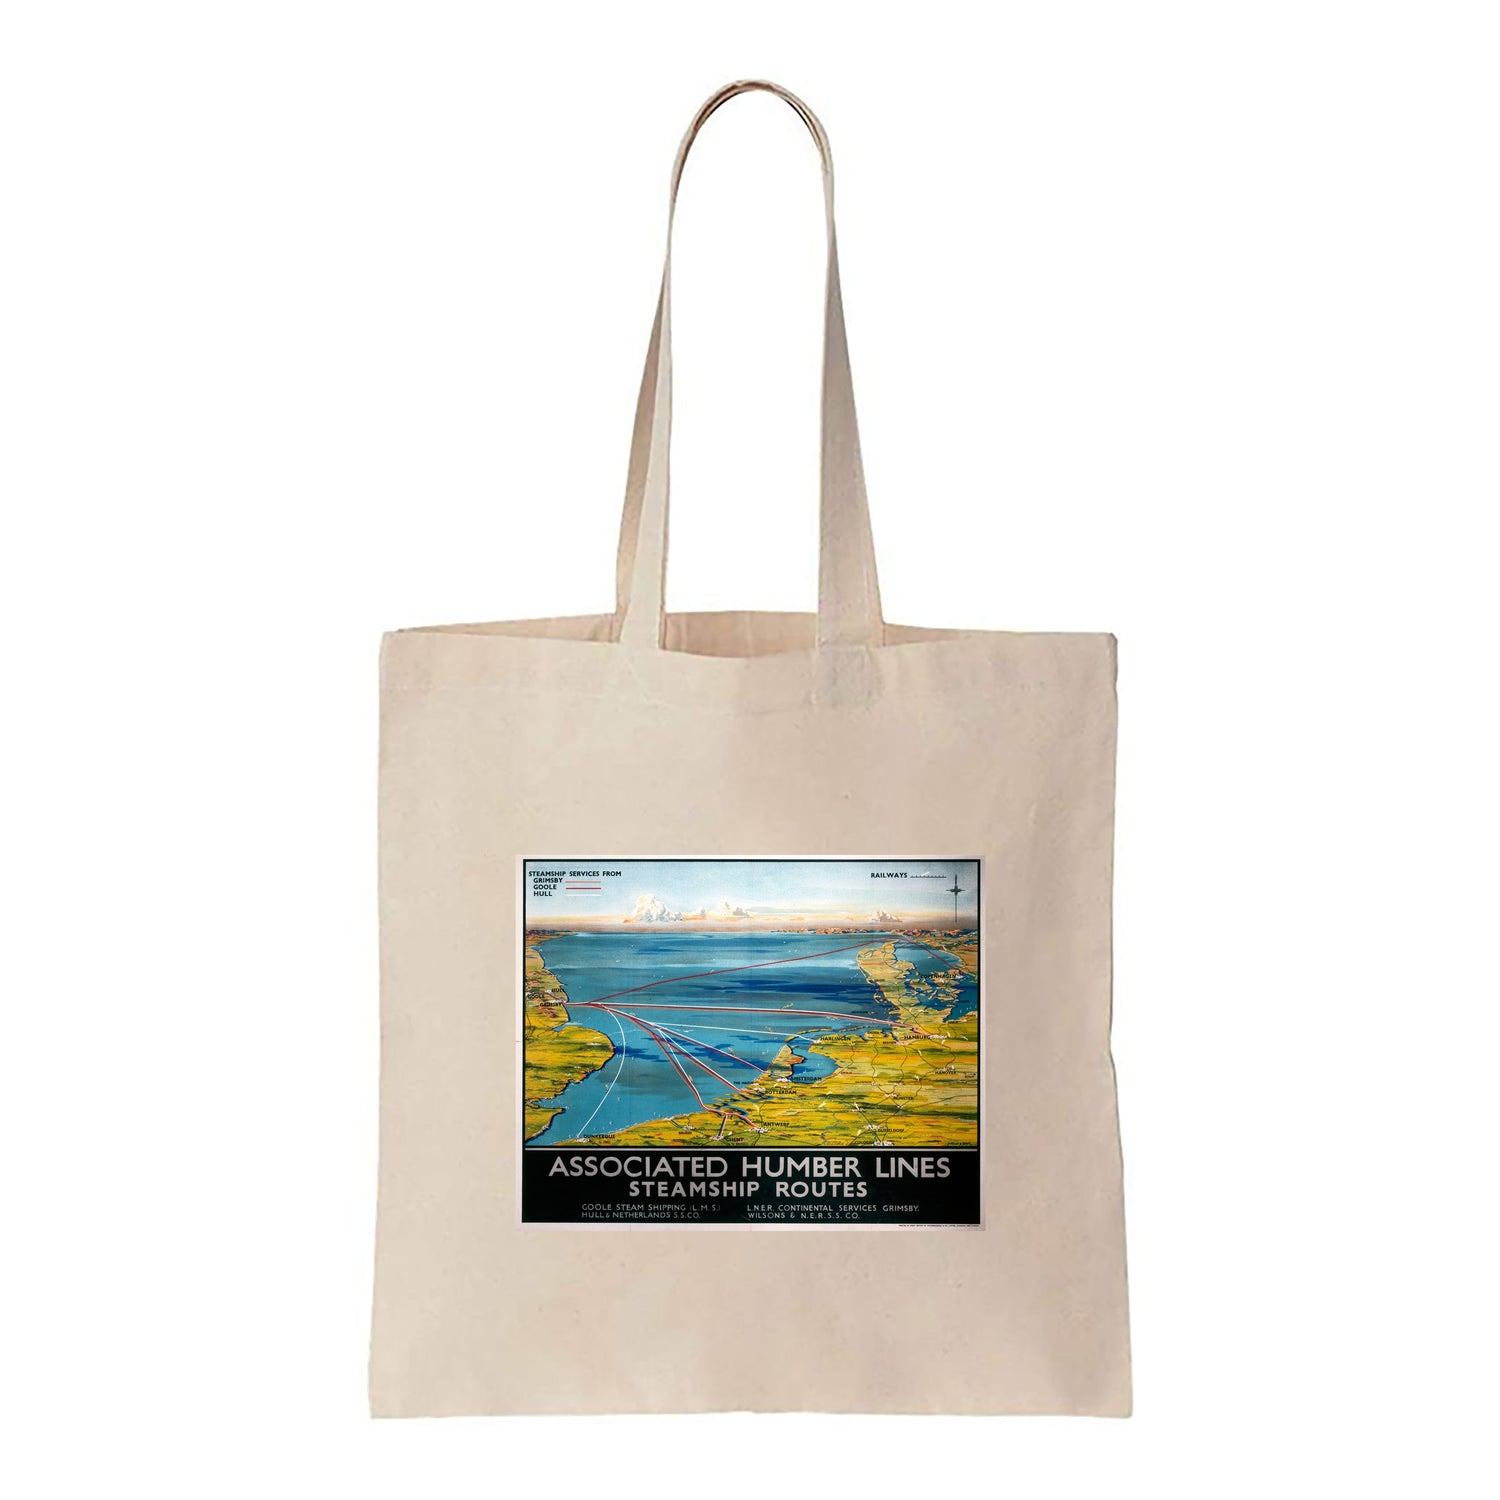 Associated Humber Lines Steamship Routes - Canvas Tote Bag